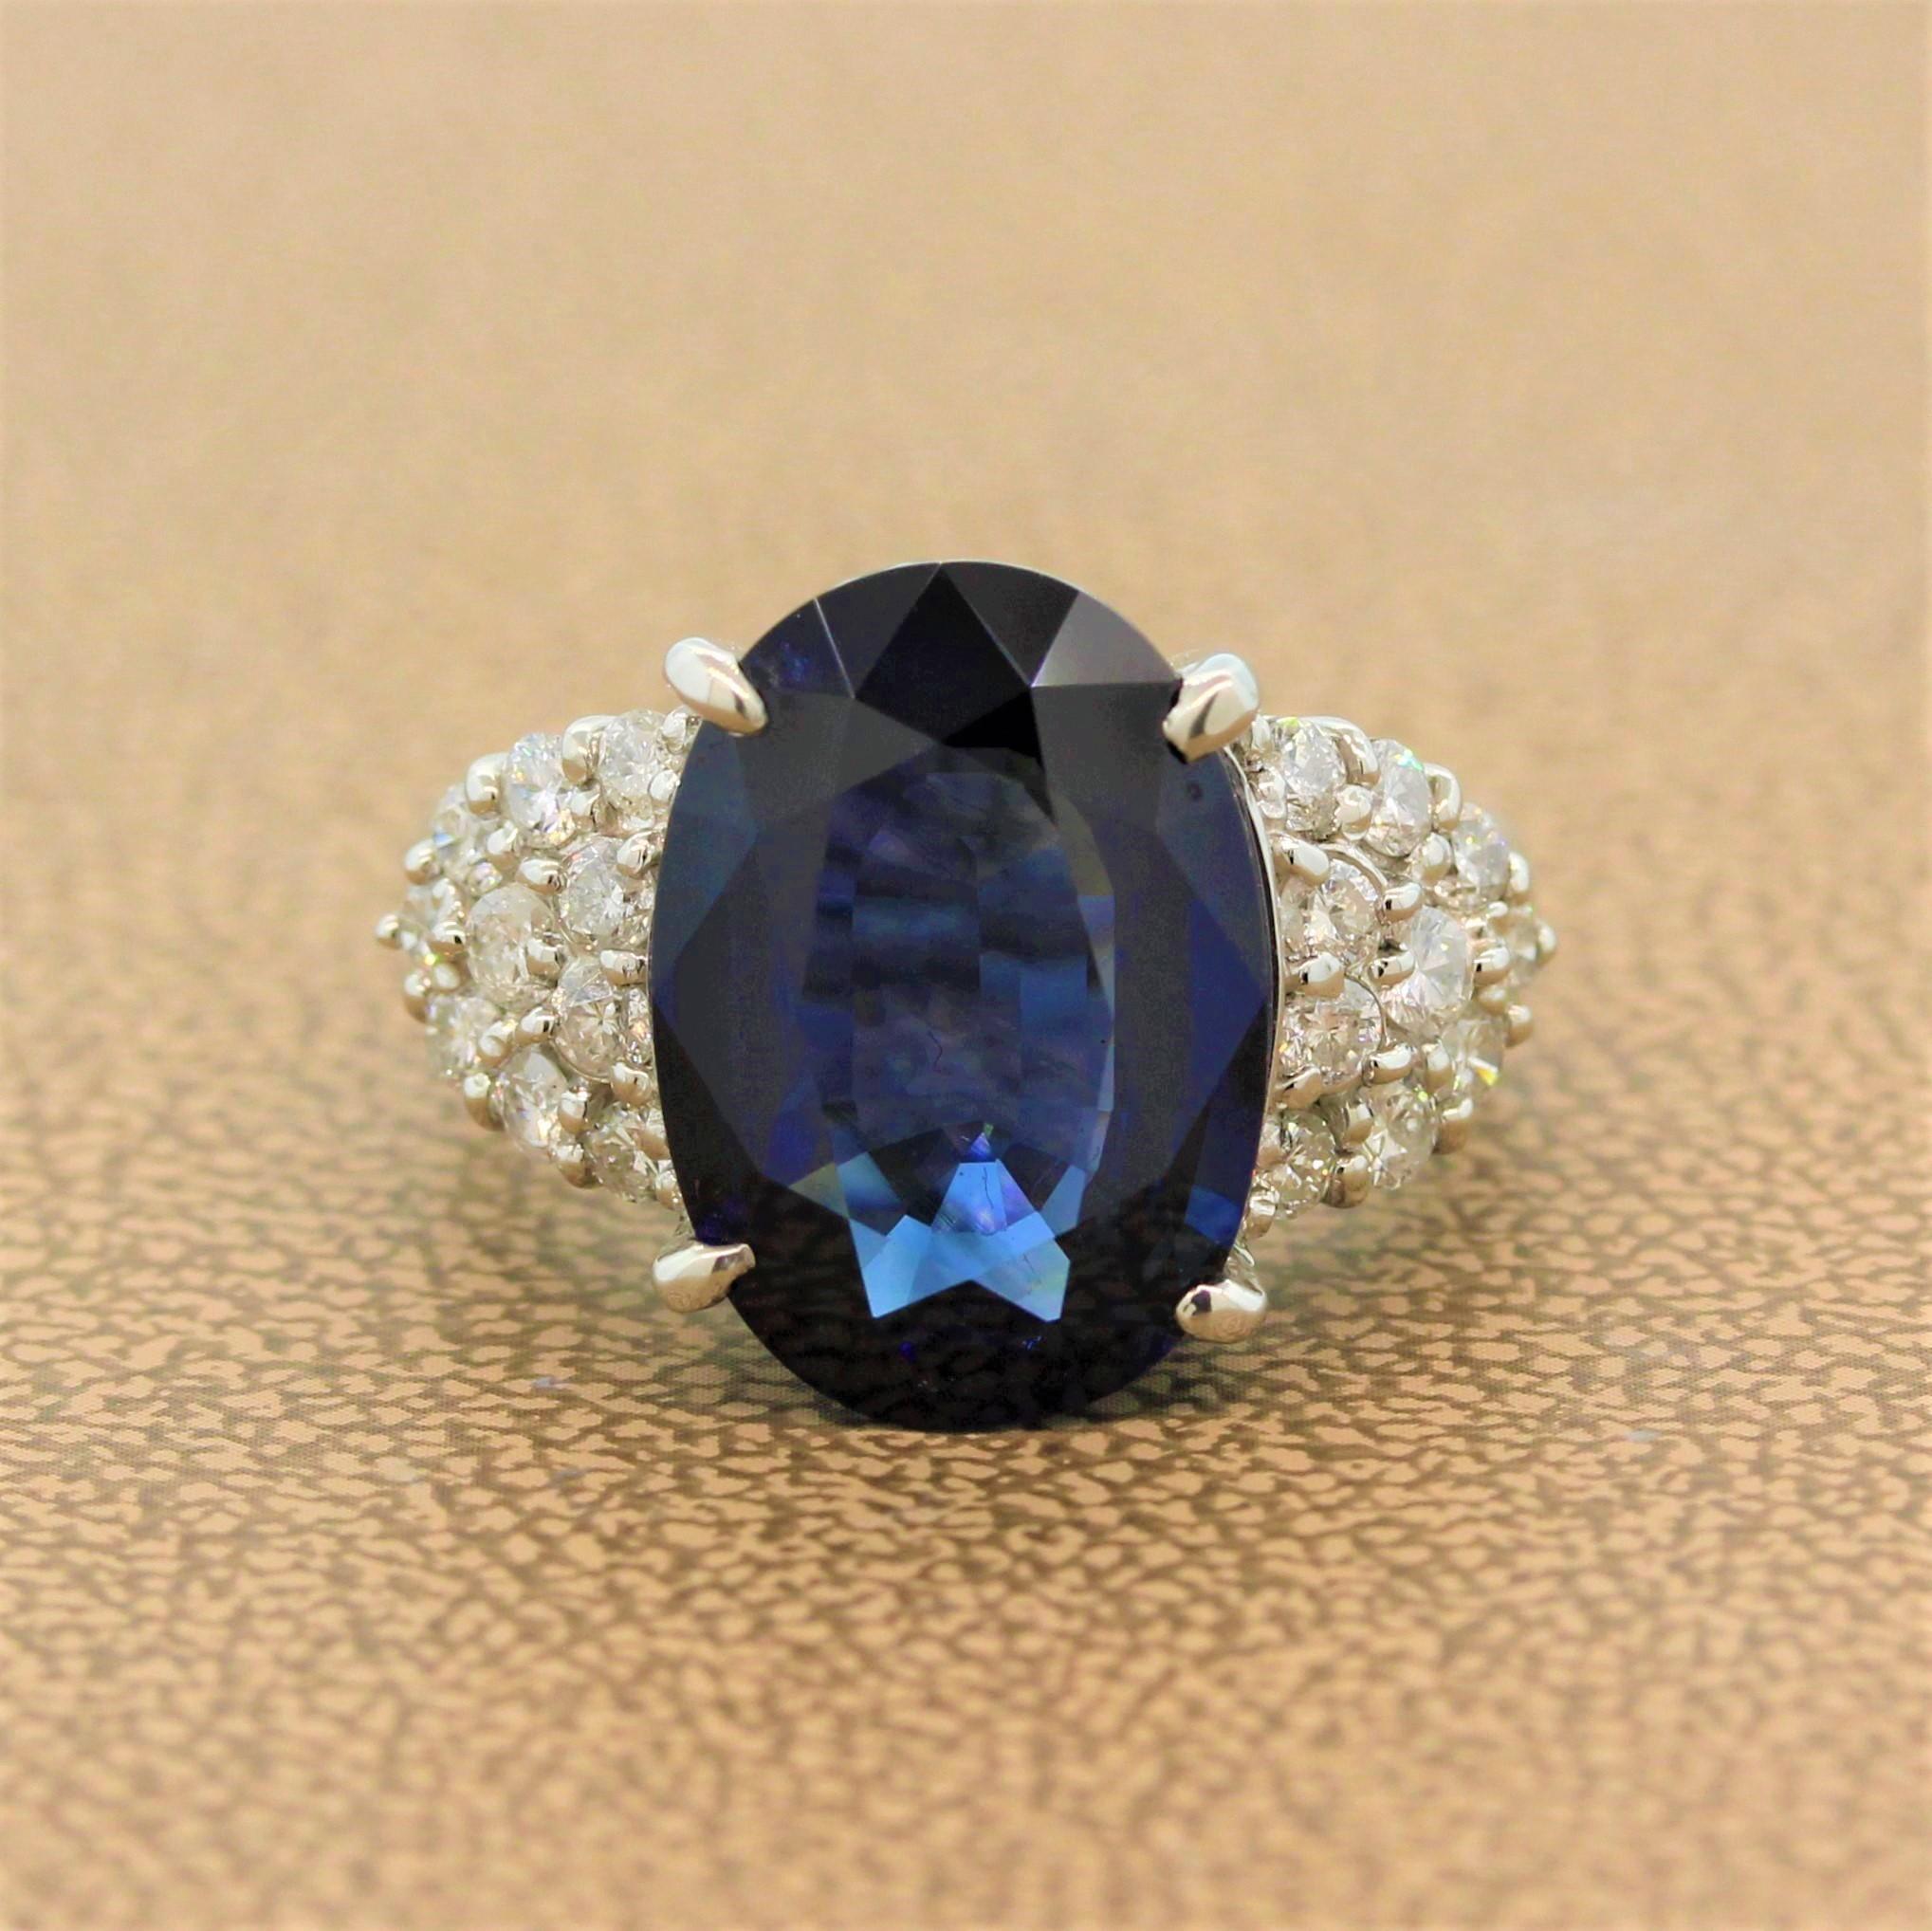 A gorgeous ring featuring a deep blue 8.24 carat oval shaped sapphire. The natural gemstone sits between two clusters of round brilliant cut diamonds in a classic prong setting. The accenting 1.03 carats of colorless diamonds add brilliance to this